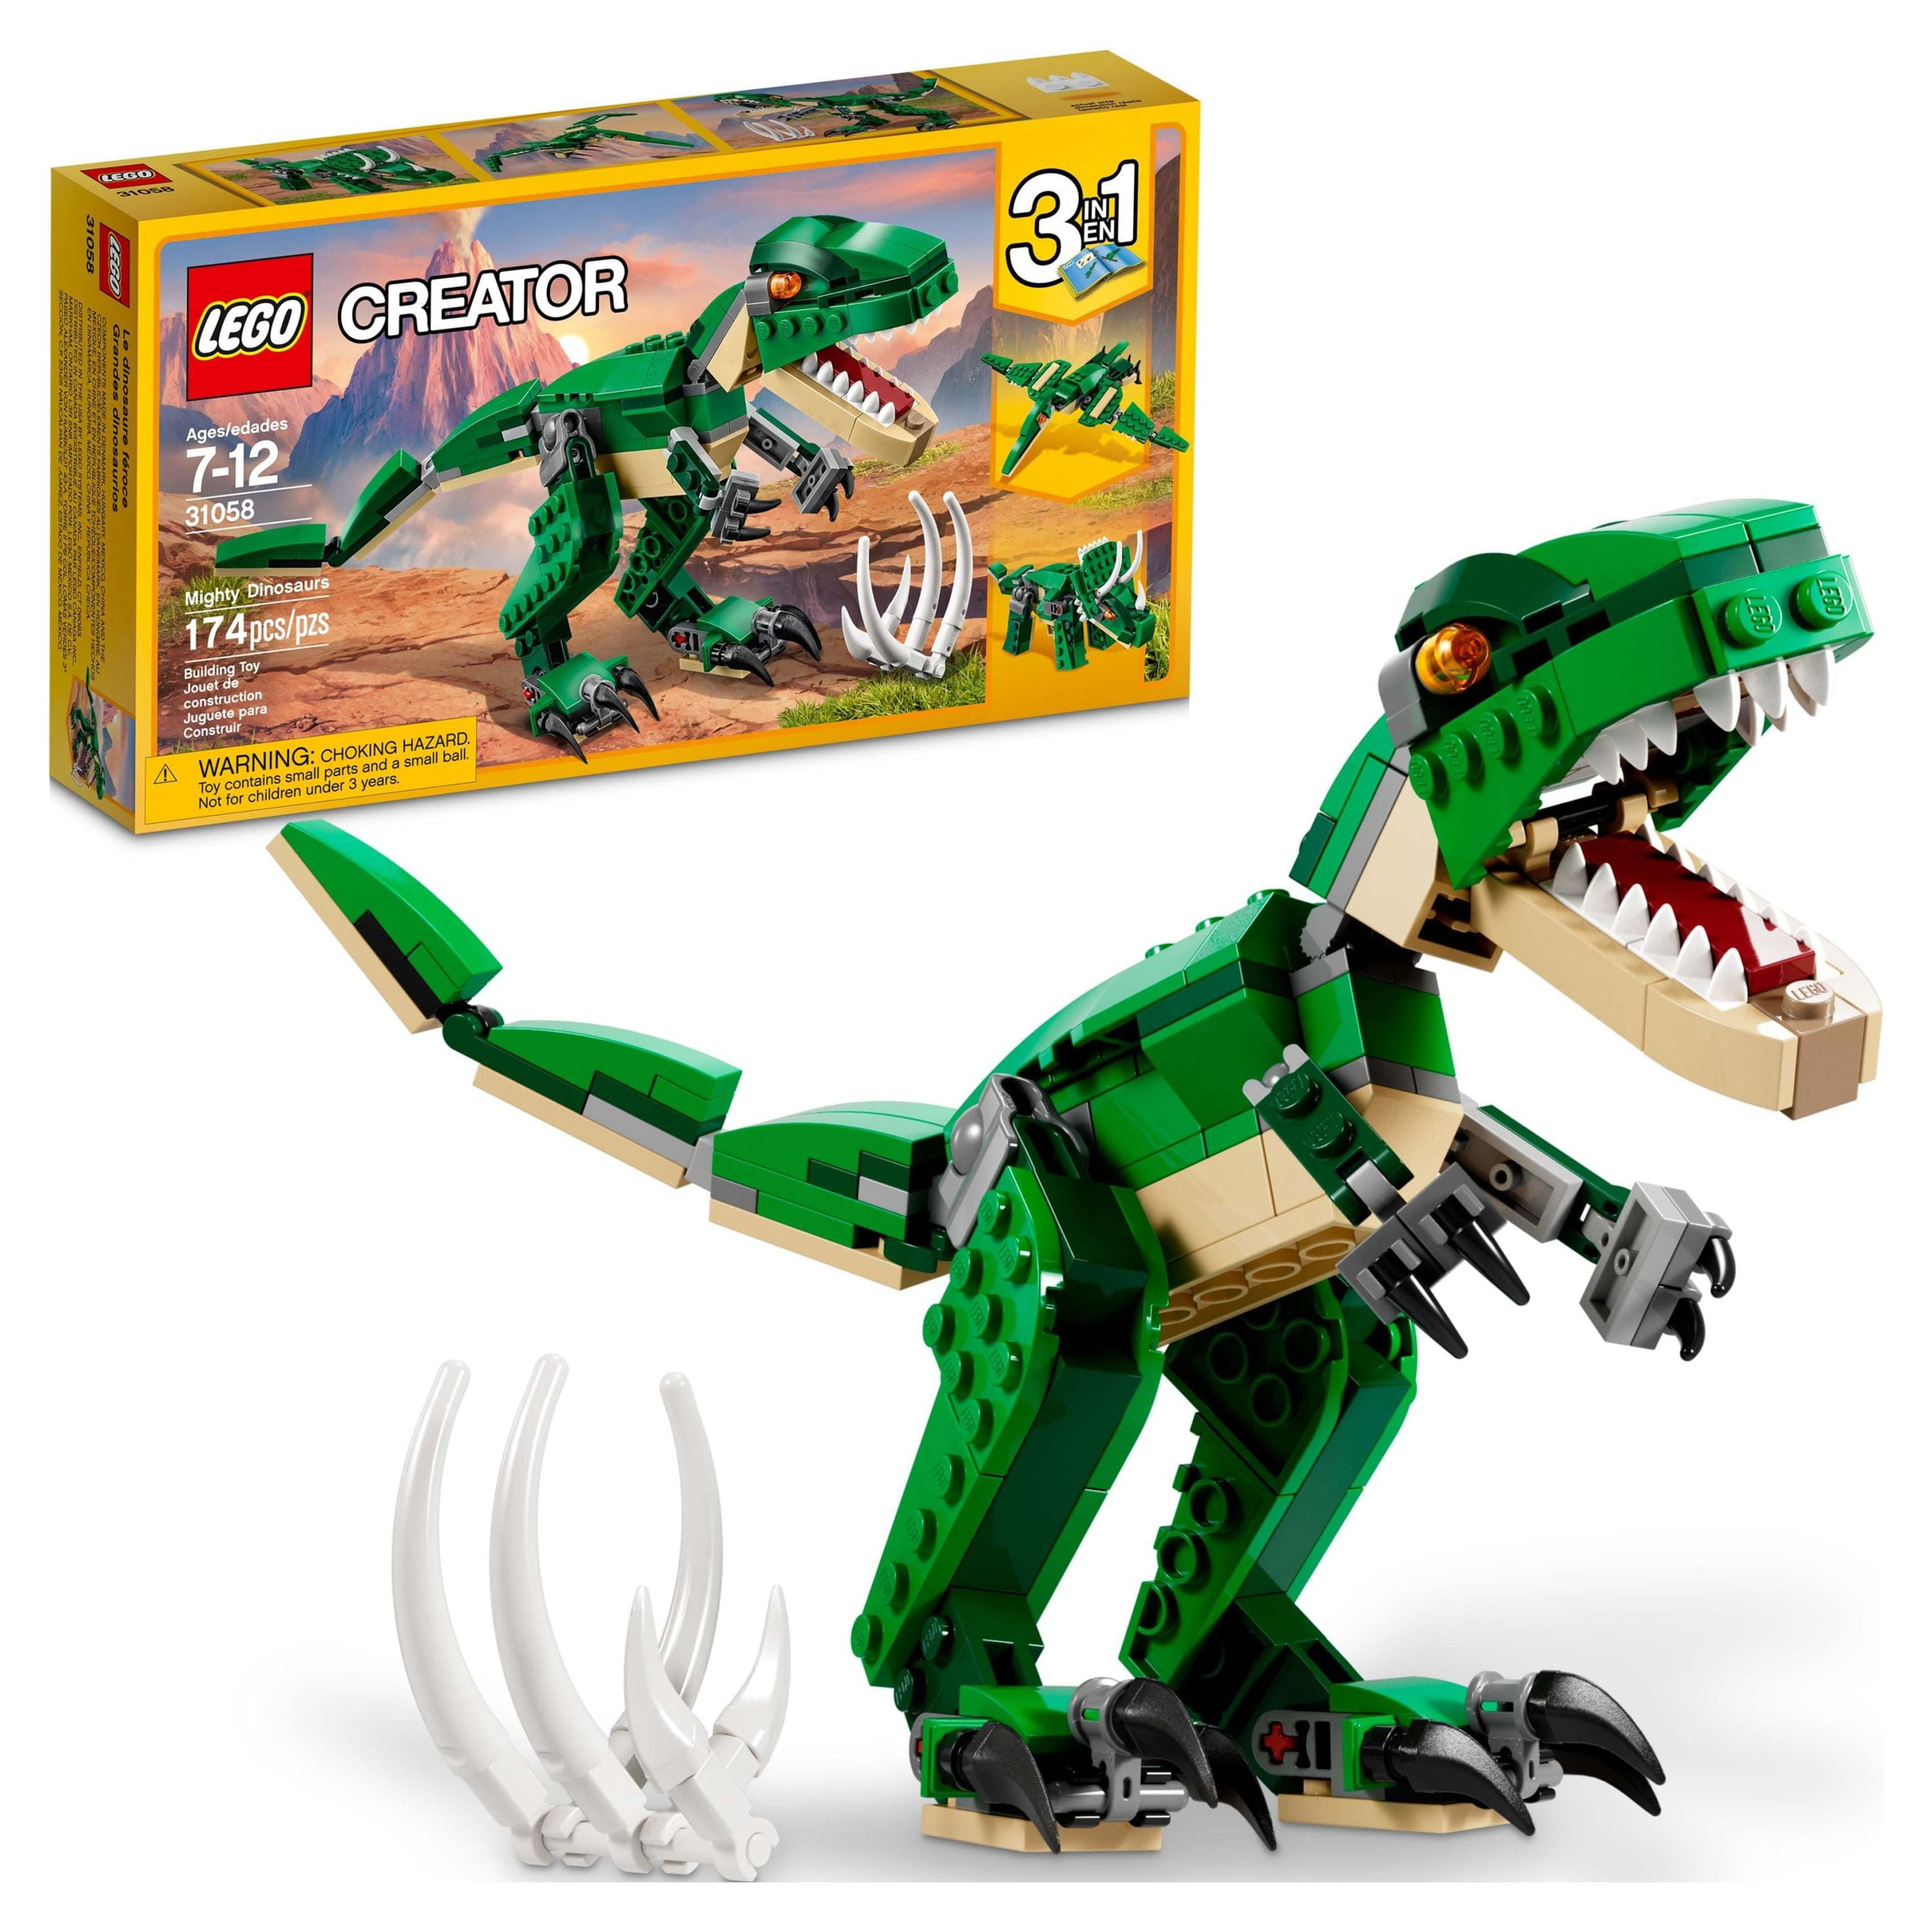 What is your favorite Lego dinosaur? : r/lego